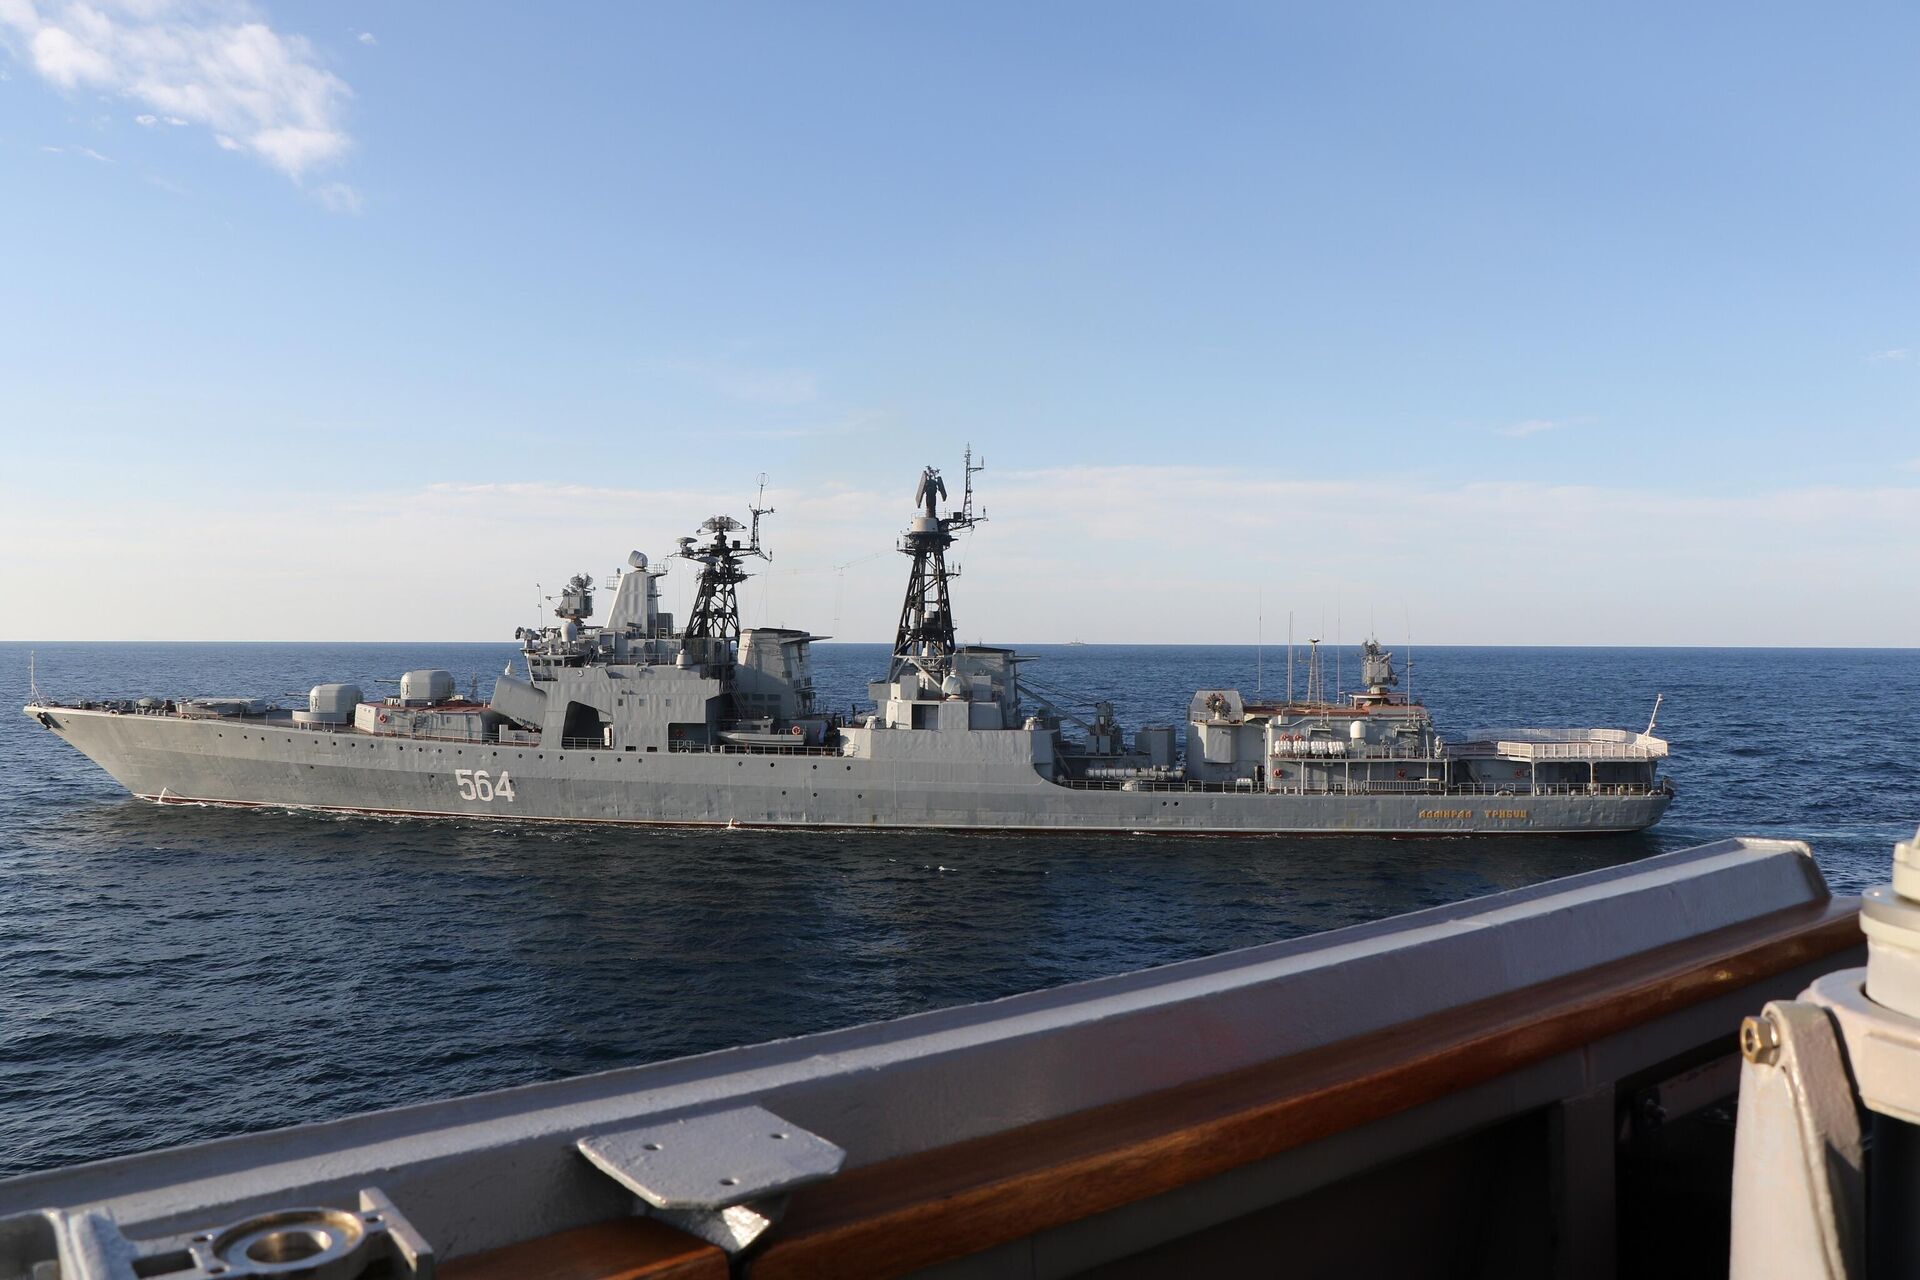 SEA OF JAPAN (Oct. 15, 2021) A Russian Udaloy-class destroyer interacts with USS Chafee (DDG 90), while Chafee conducts routine operations in international waters in the Sea of Japan. (U.S. Navy photo) - Sputnik International, 1920, 15.10.2021